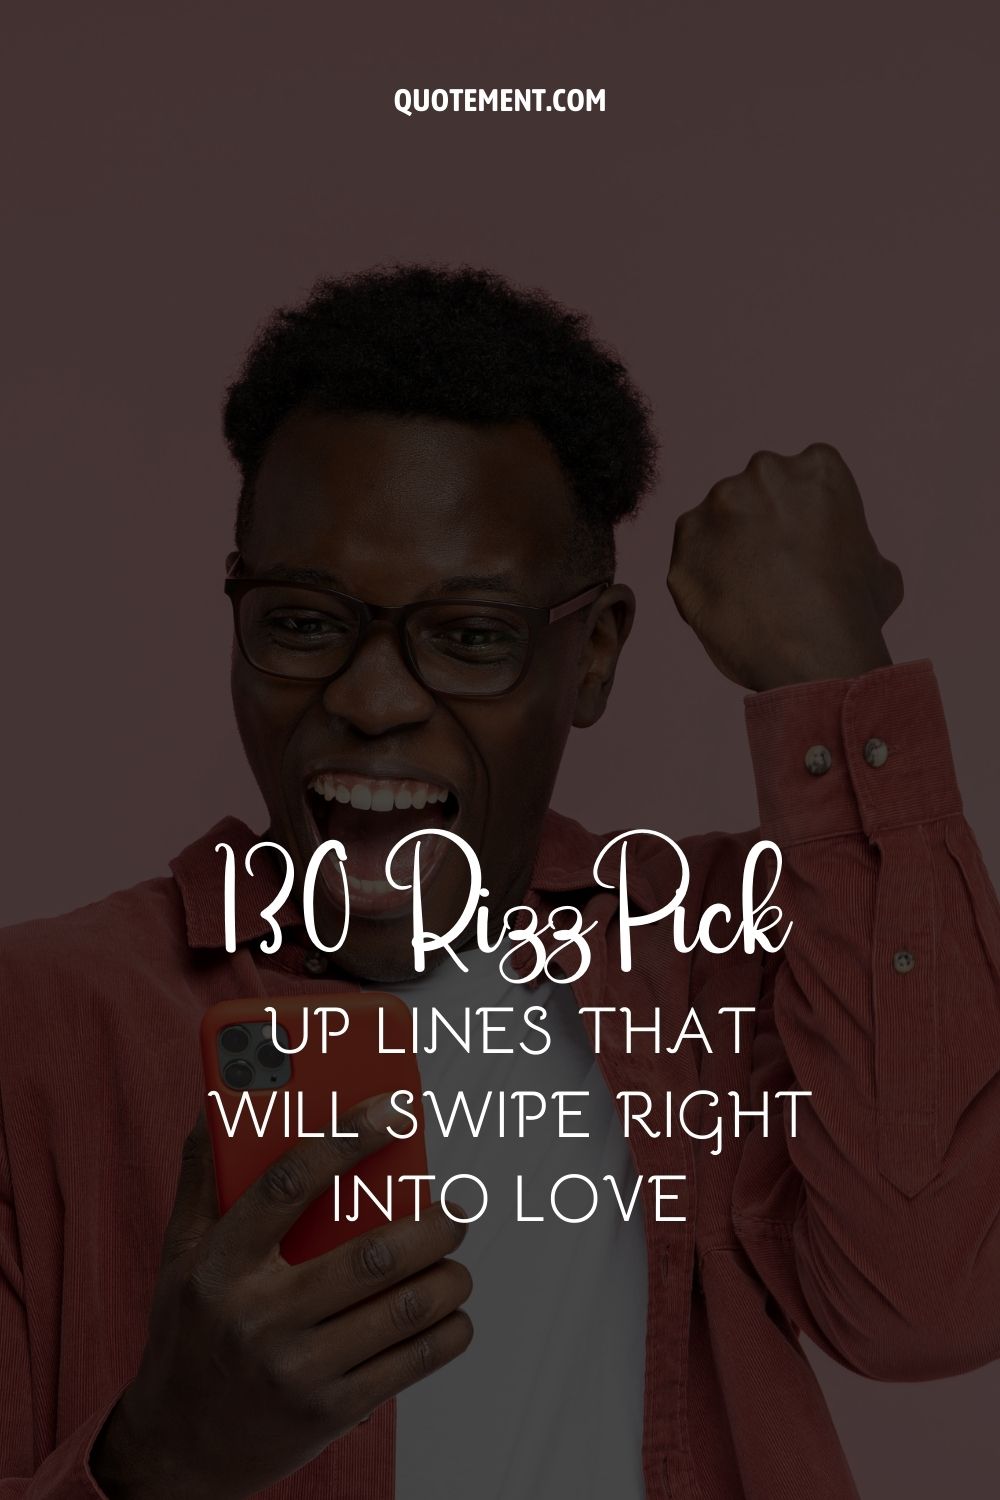 130 Rizz Pick Up Lines That Will Swipe Right Into Love